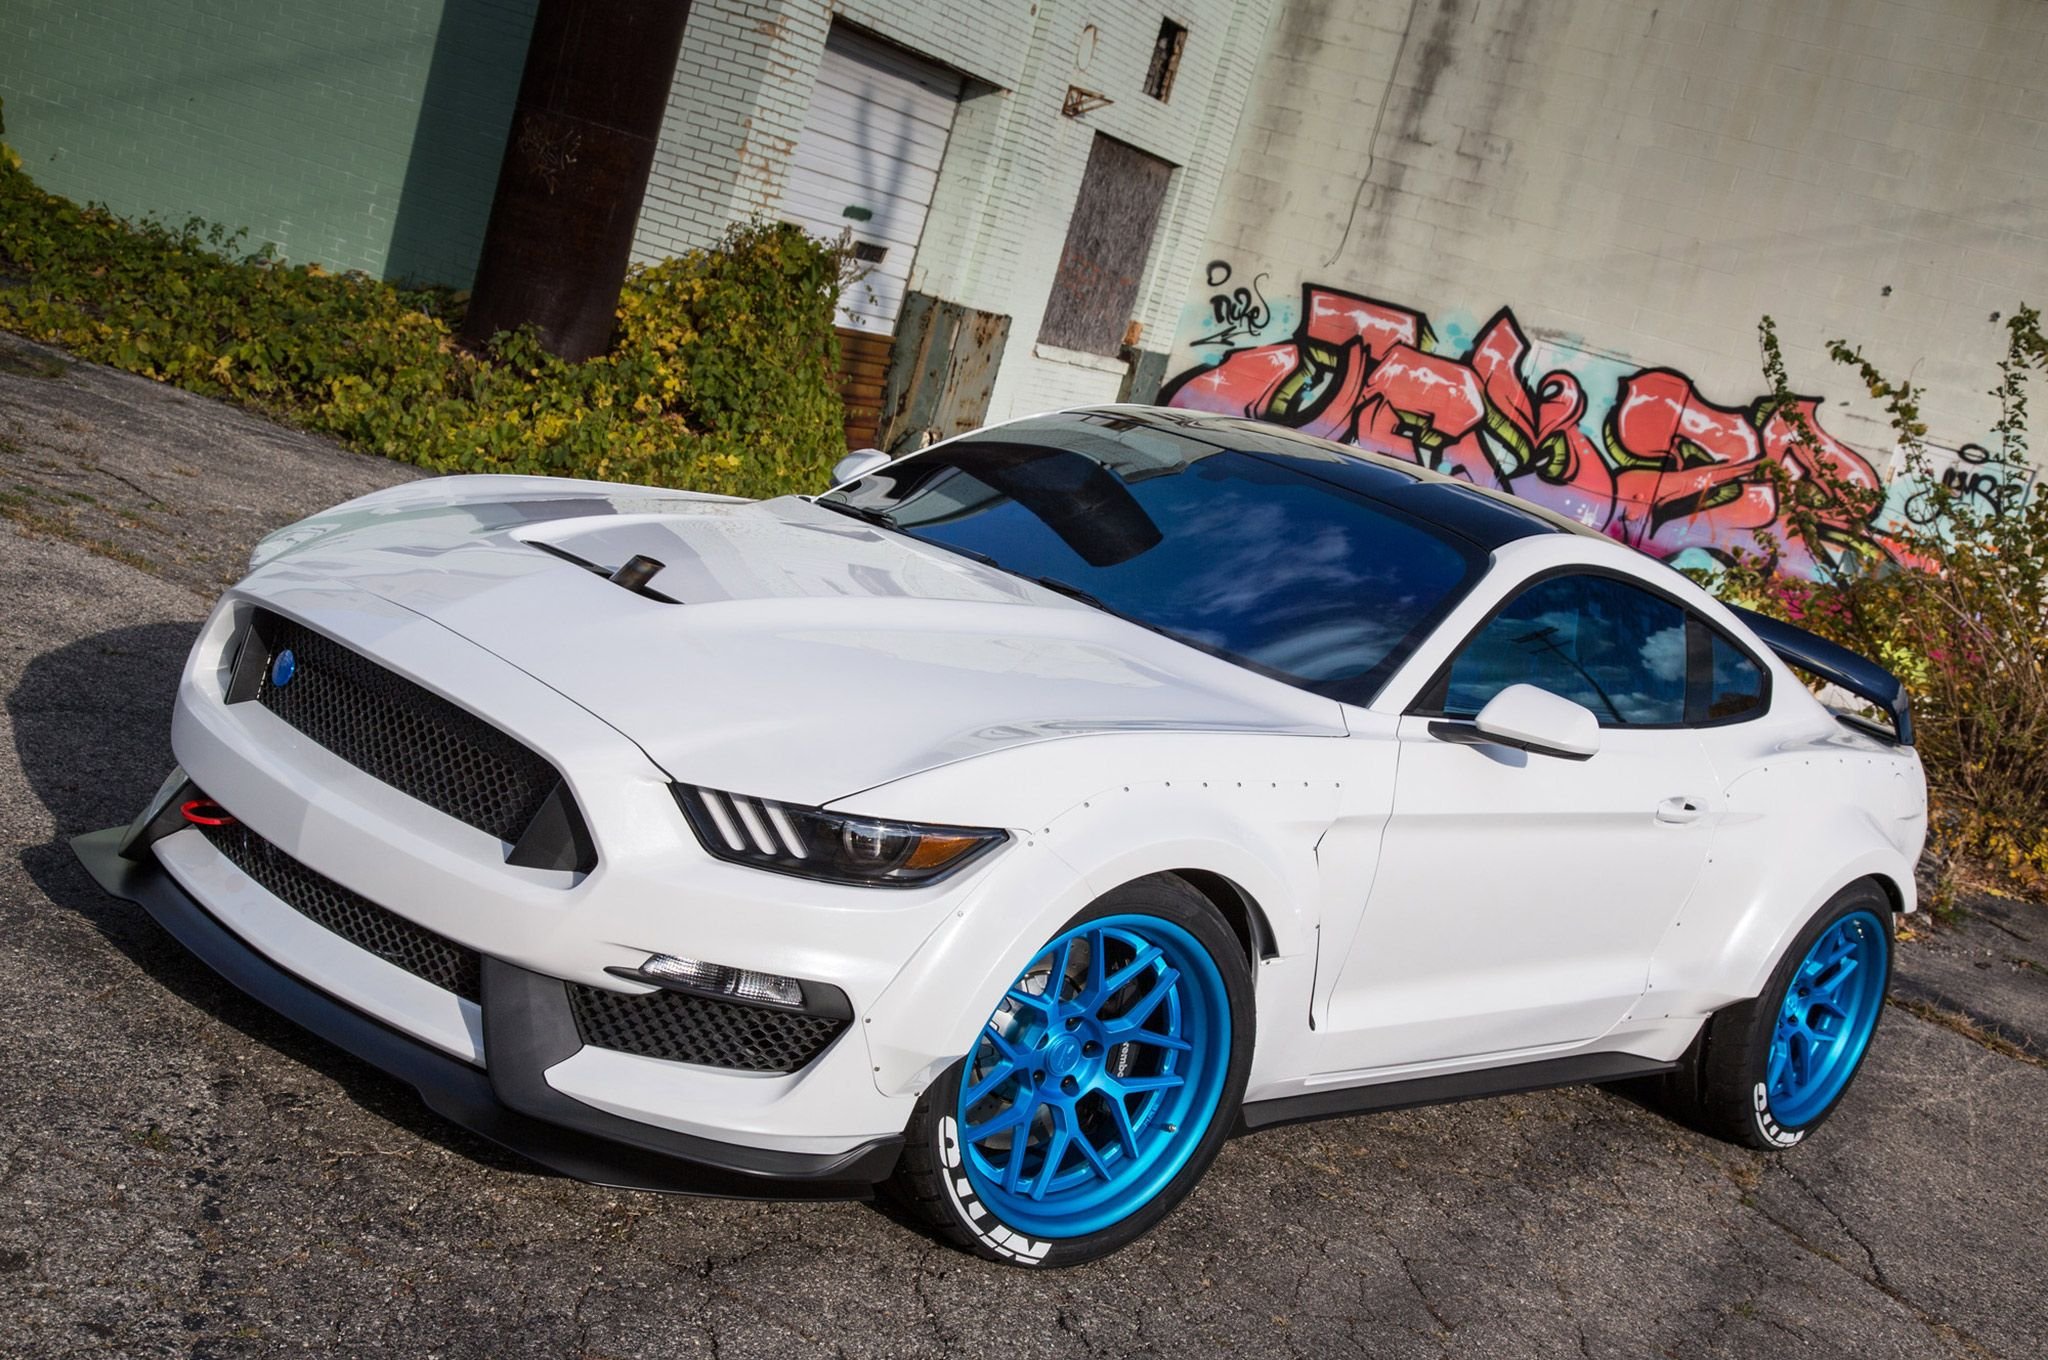 2015, S550, Ford, Mustang, Muscle, Tuning, Custom, Hot, Rod, Rods, Drift, Race, Racing Wallpaper